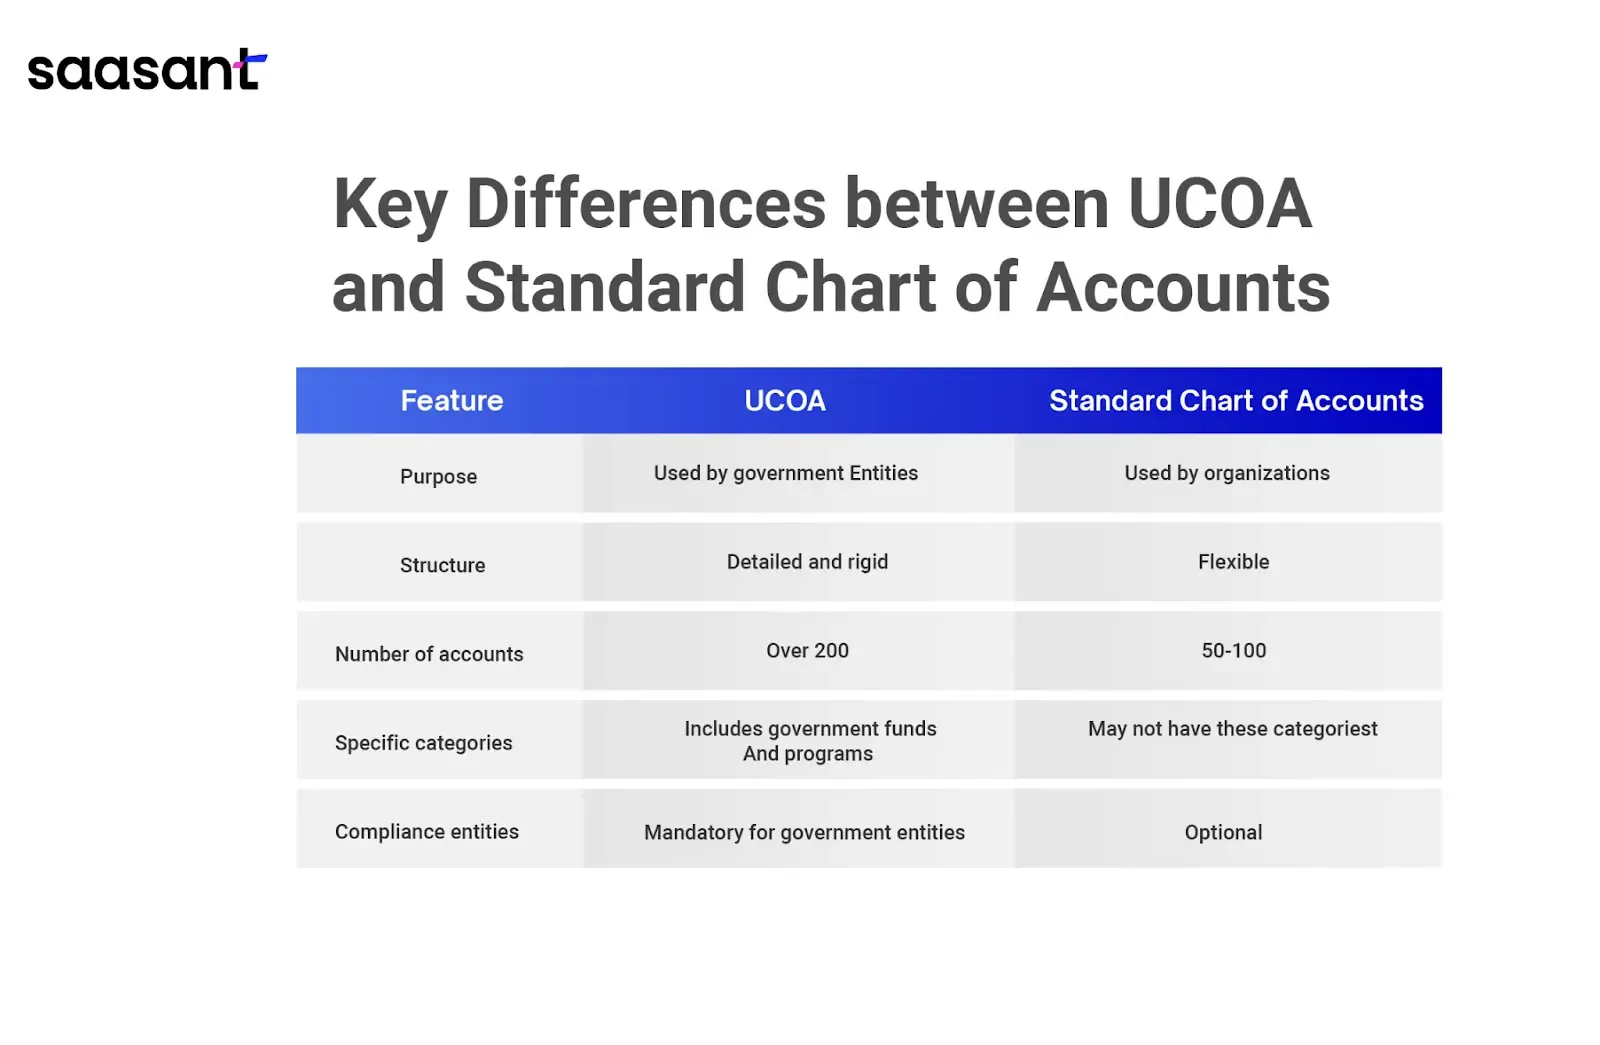 Key Differences between UCOA and Standard Chart of Accounts